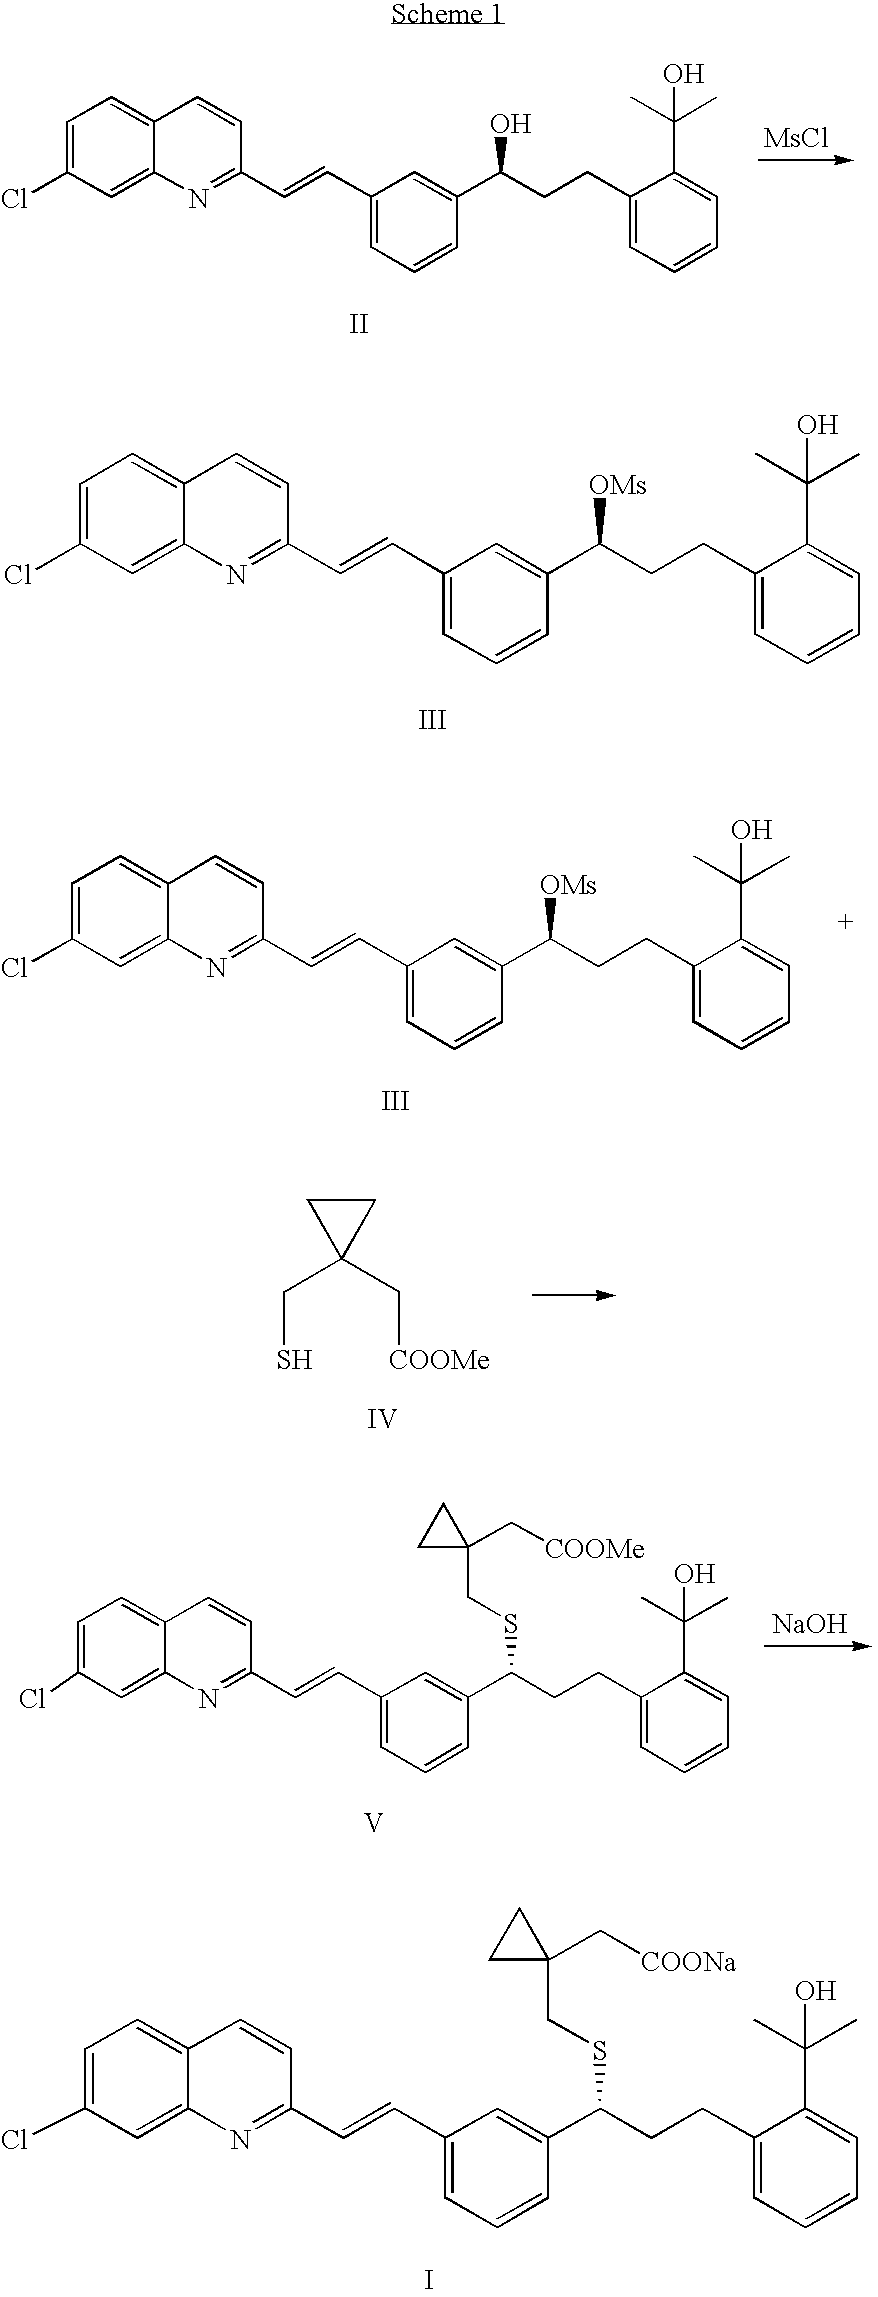 Process for preparing montelukast sodium containing controlled levels of impurities